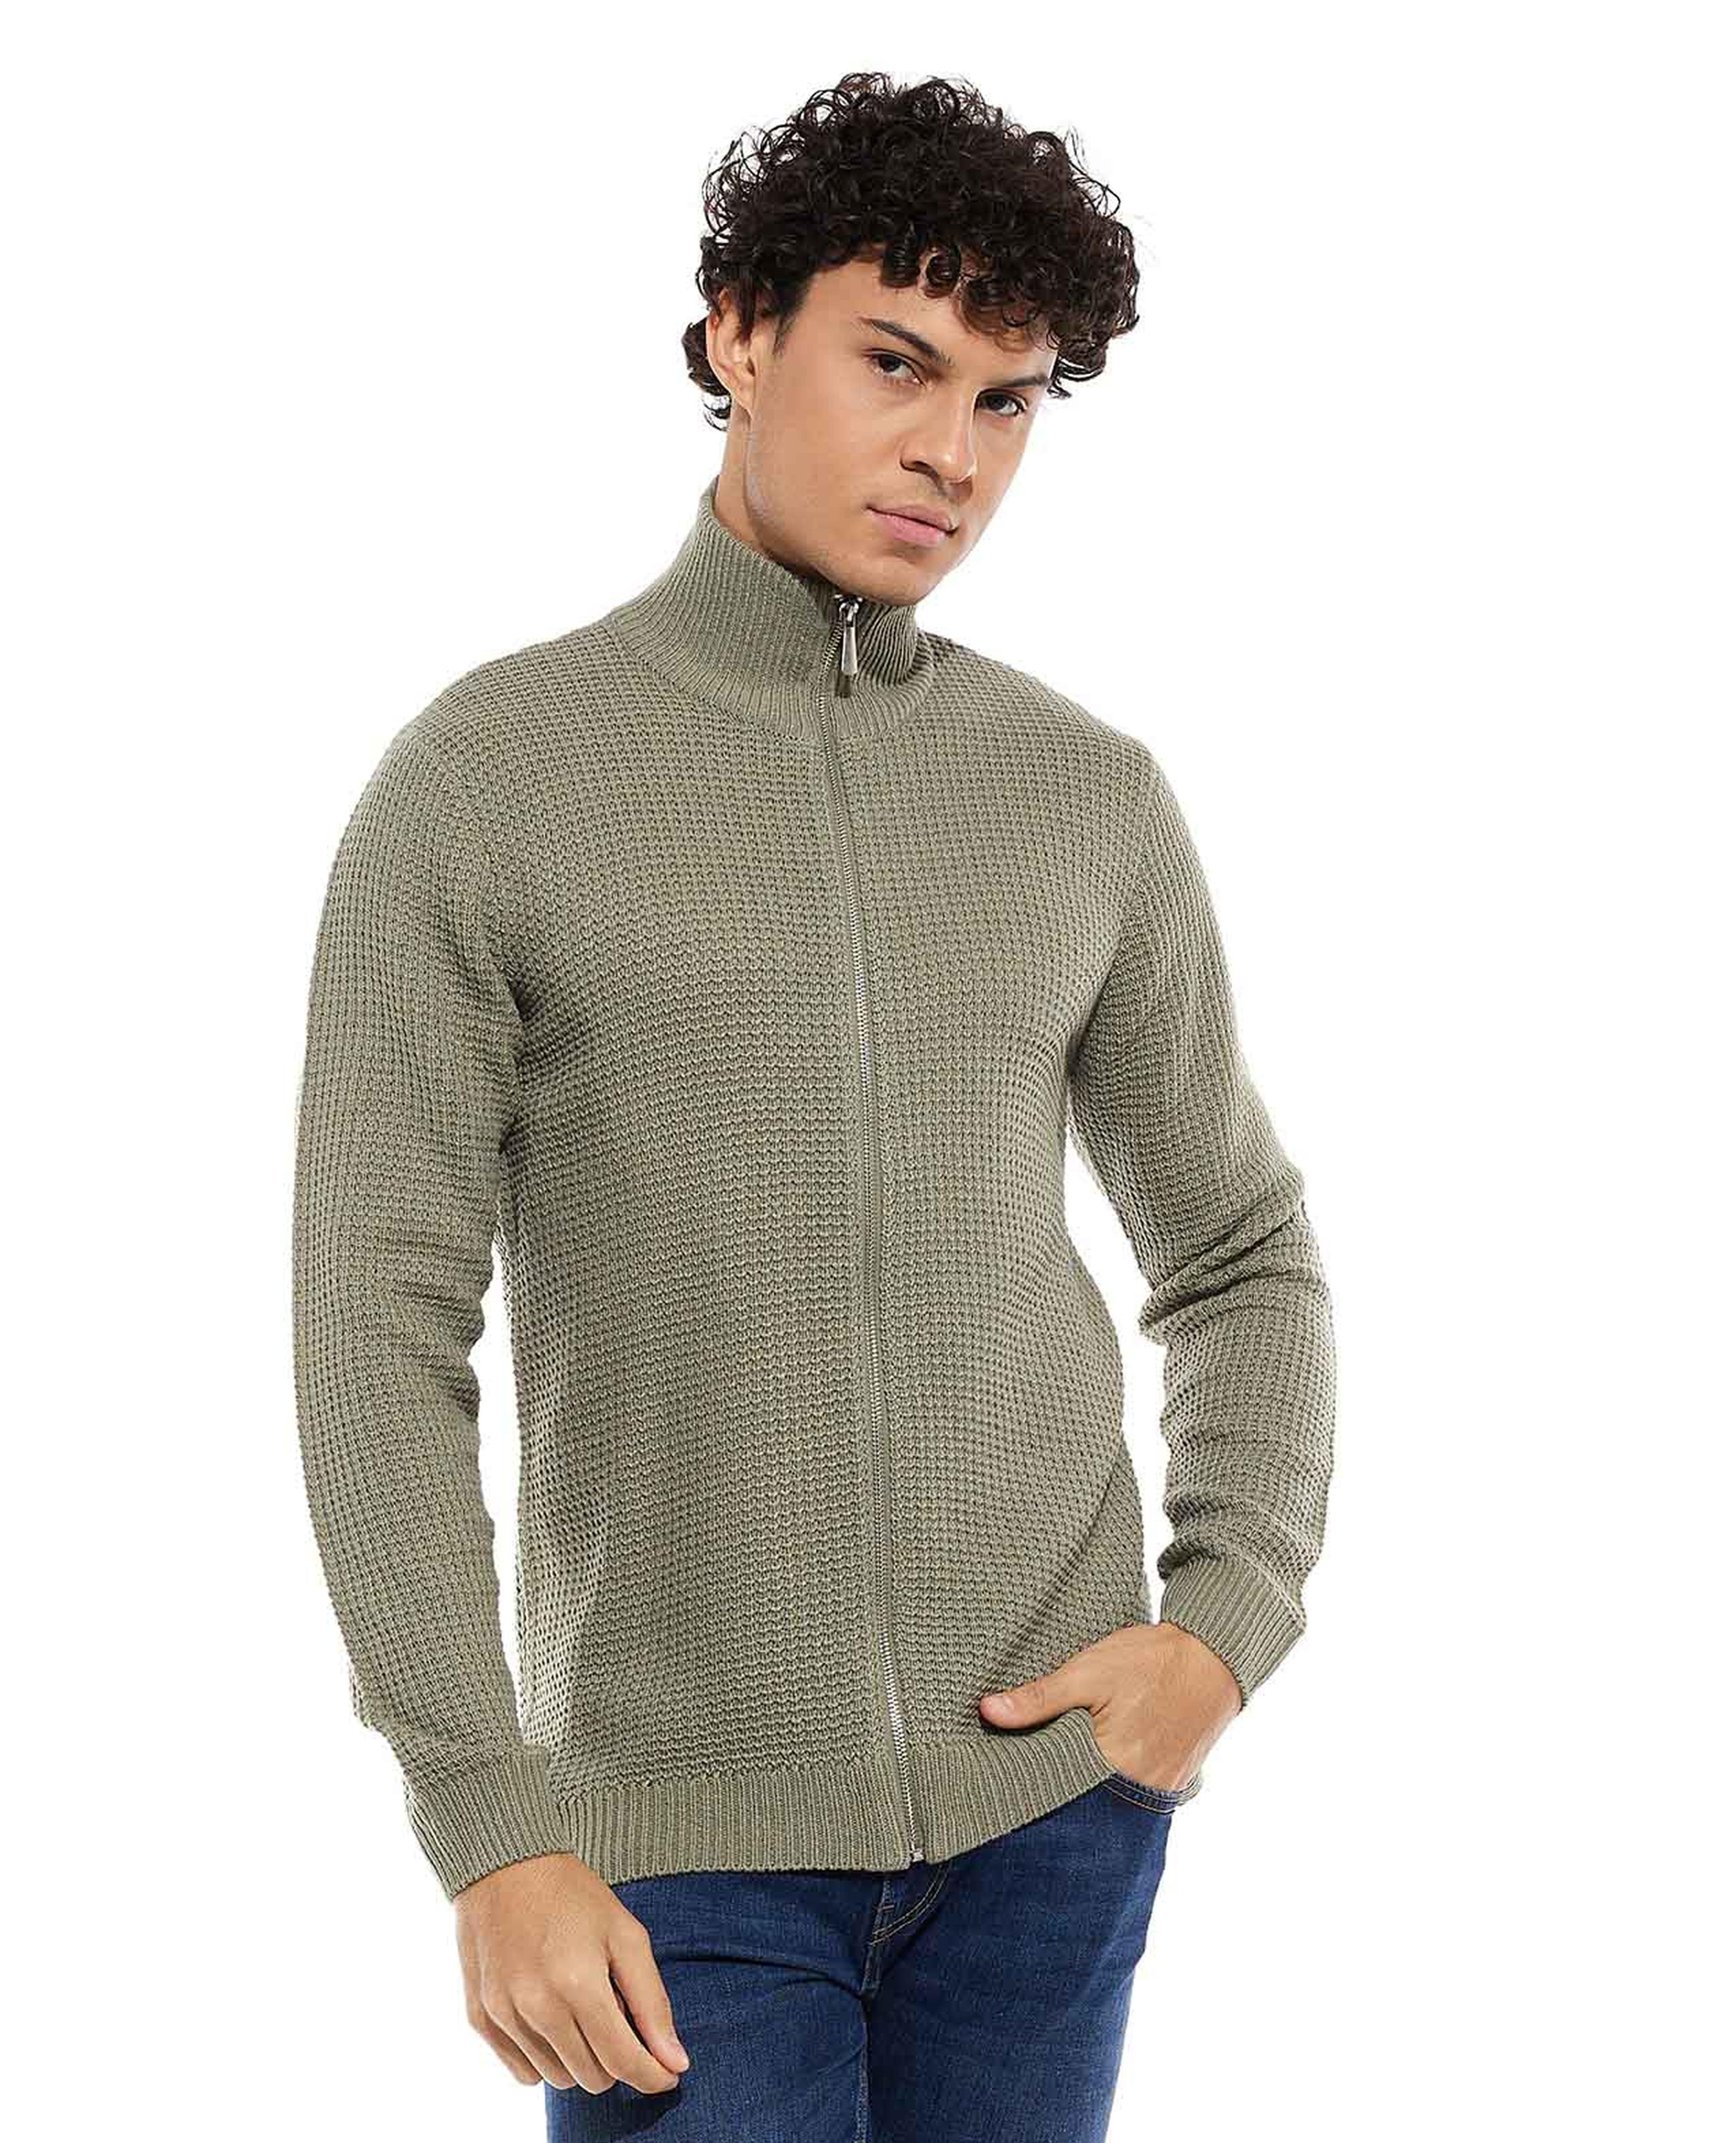 Knitted Sweater with Zipper Closure